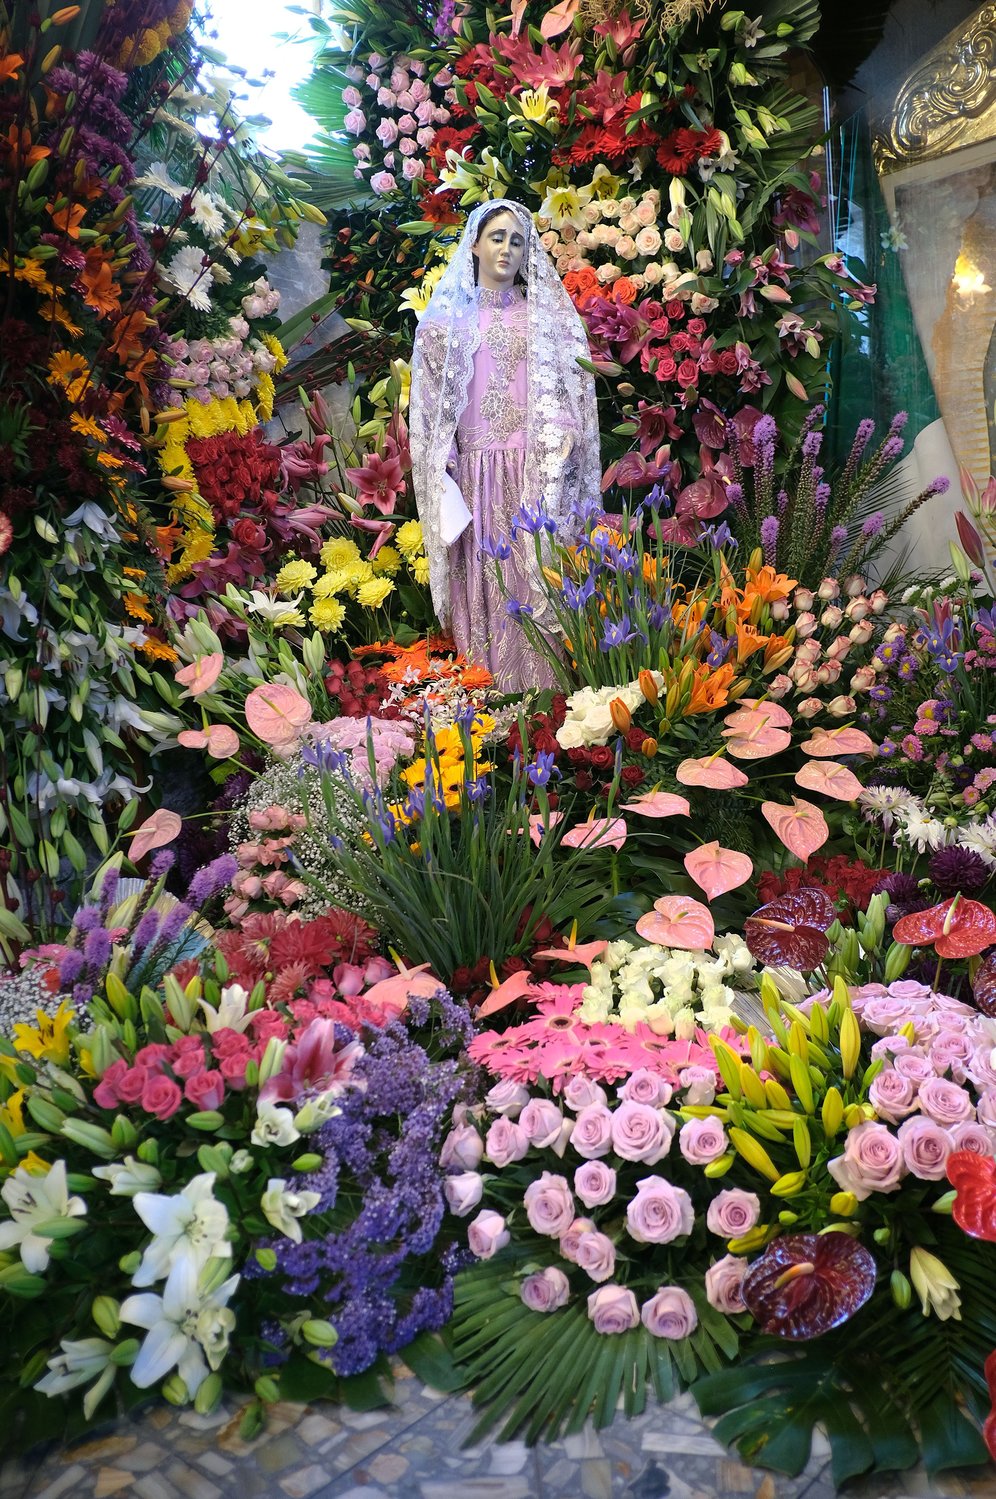 An image of Mary is pictured surrounded by floral arrangements inside Santa Ana Ixtlahuatzingo Catholic Church in Tenancingo, Mexico, July 26. The floral arrangements were for the feast of the church’s patron saint, St. Anne, Mary’s mother.